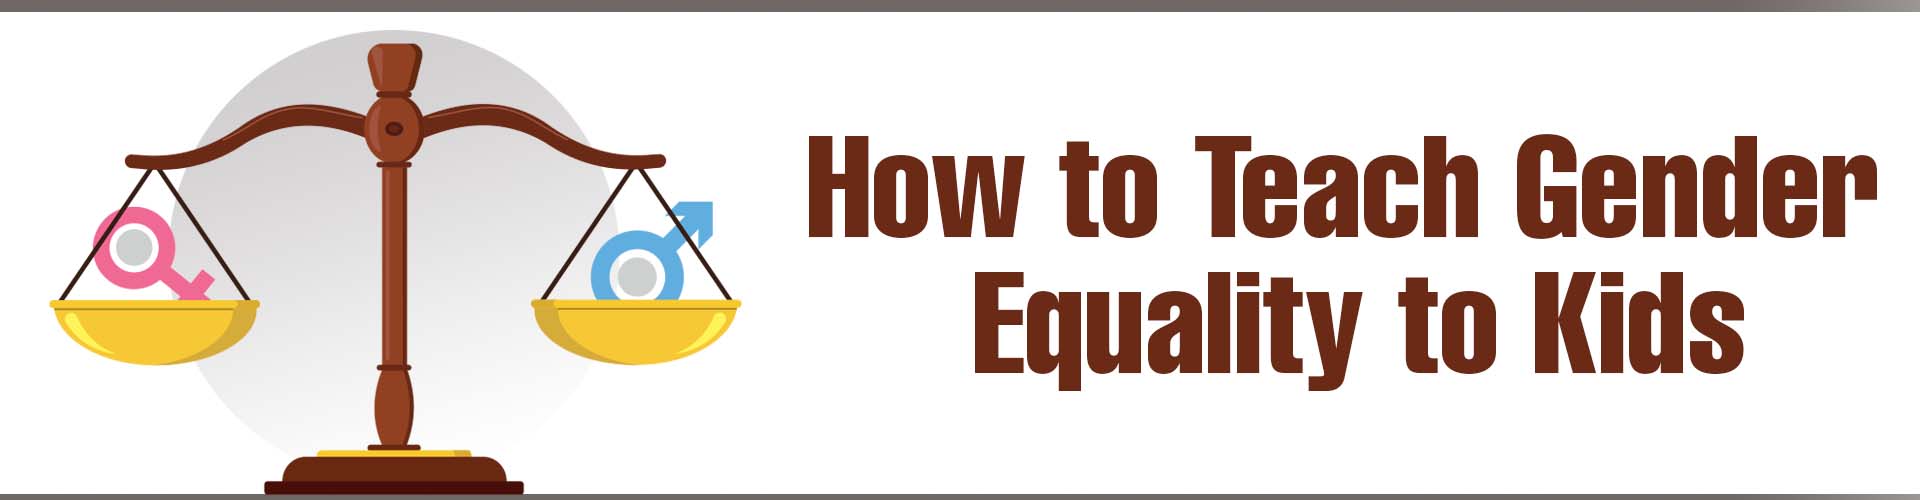 How to Teach Gender Equality for Kids